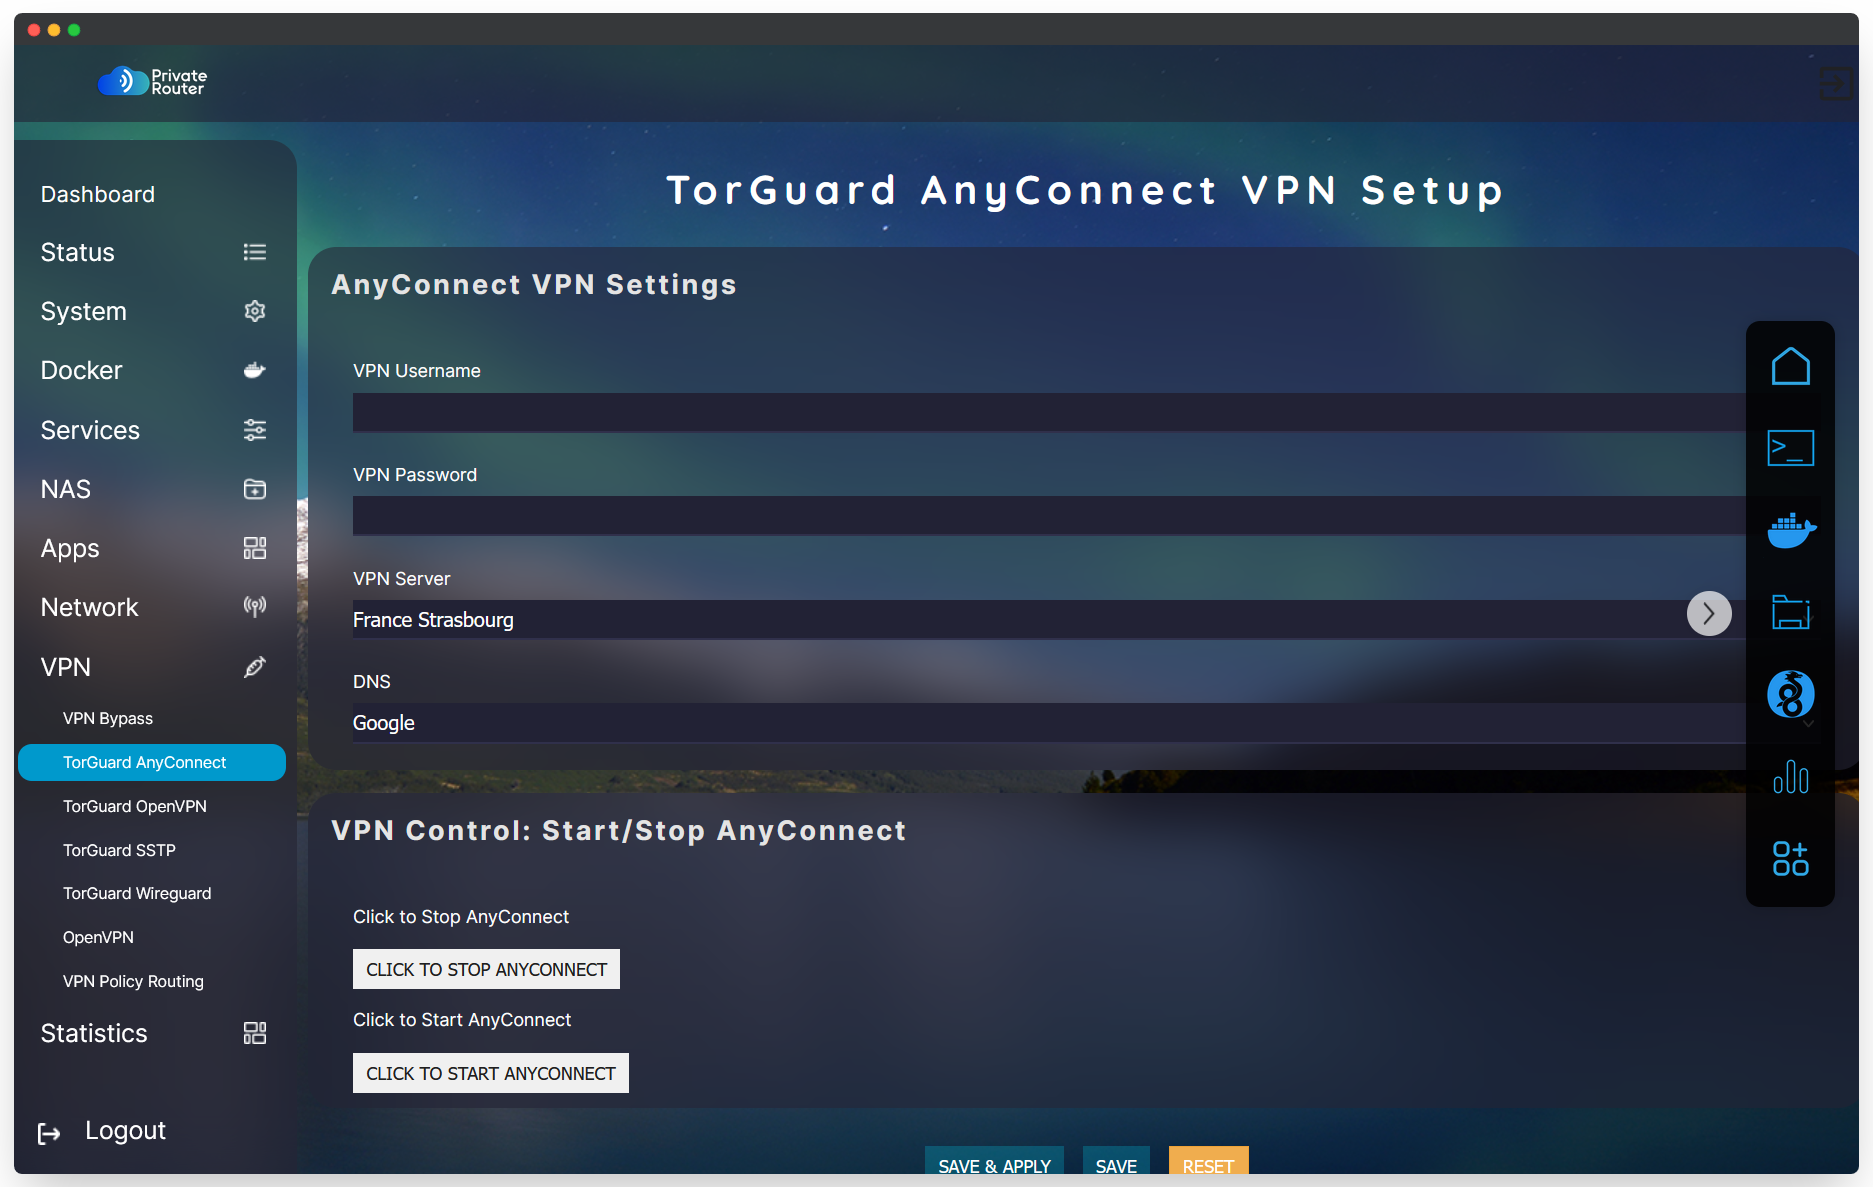 Built in TorGuard Anyconnect Support